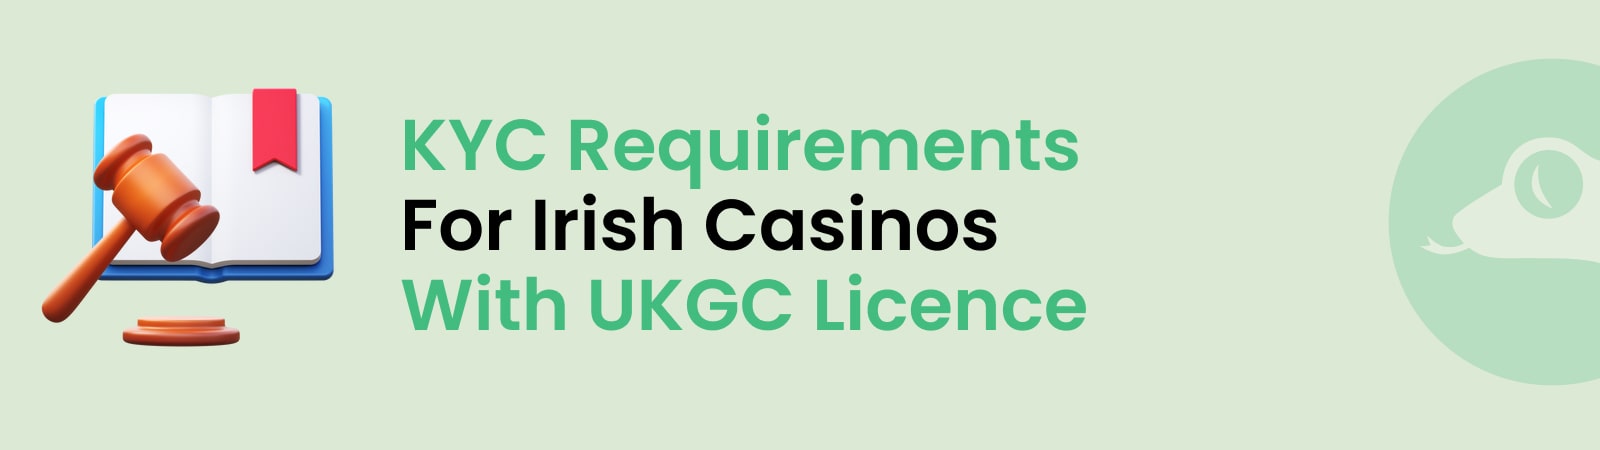 kyc requirements for irish casinos with ukgc licence